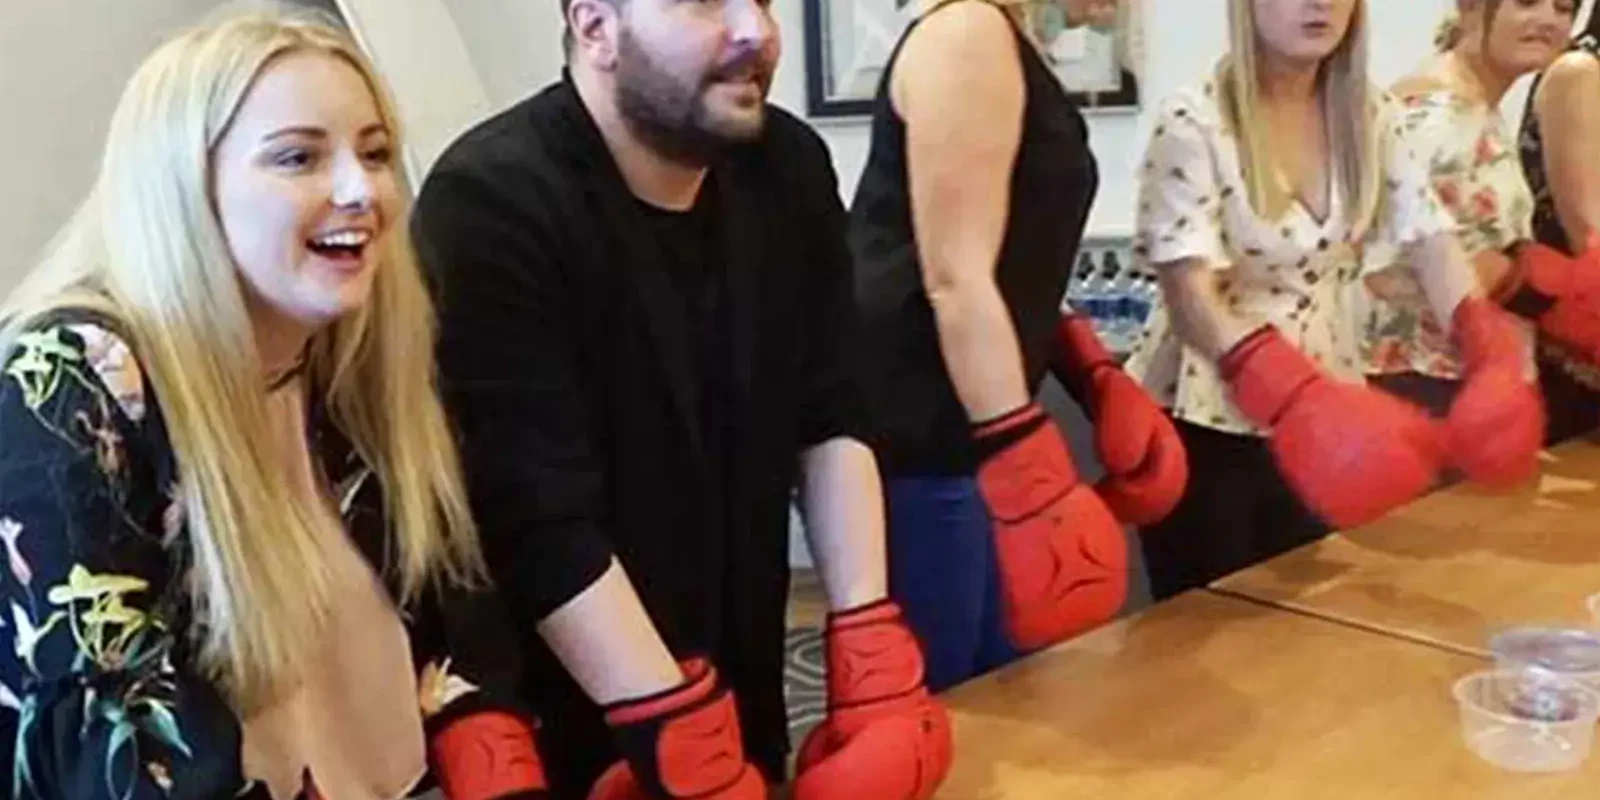 Master of the tasks team building challenge with people wearing boxing gloves